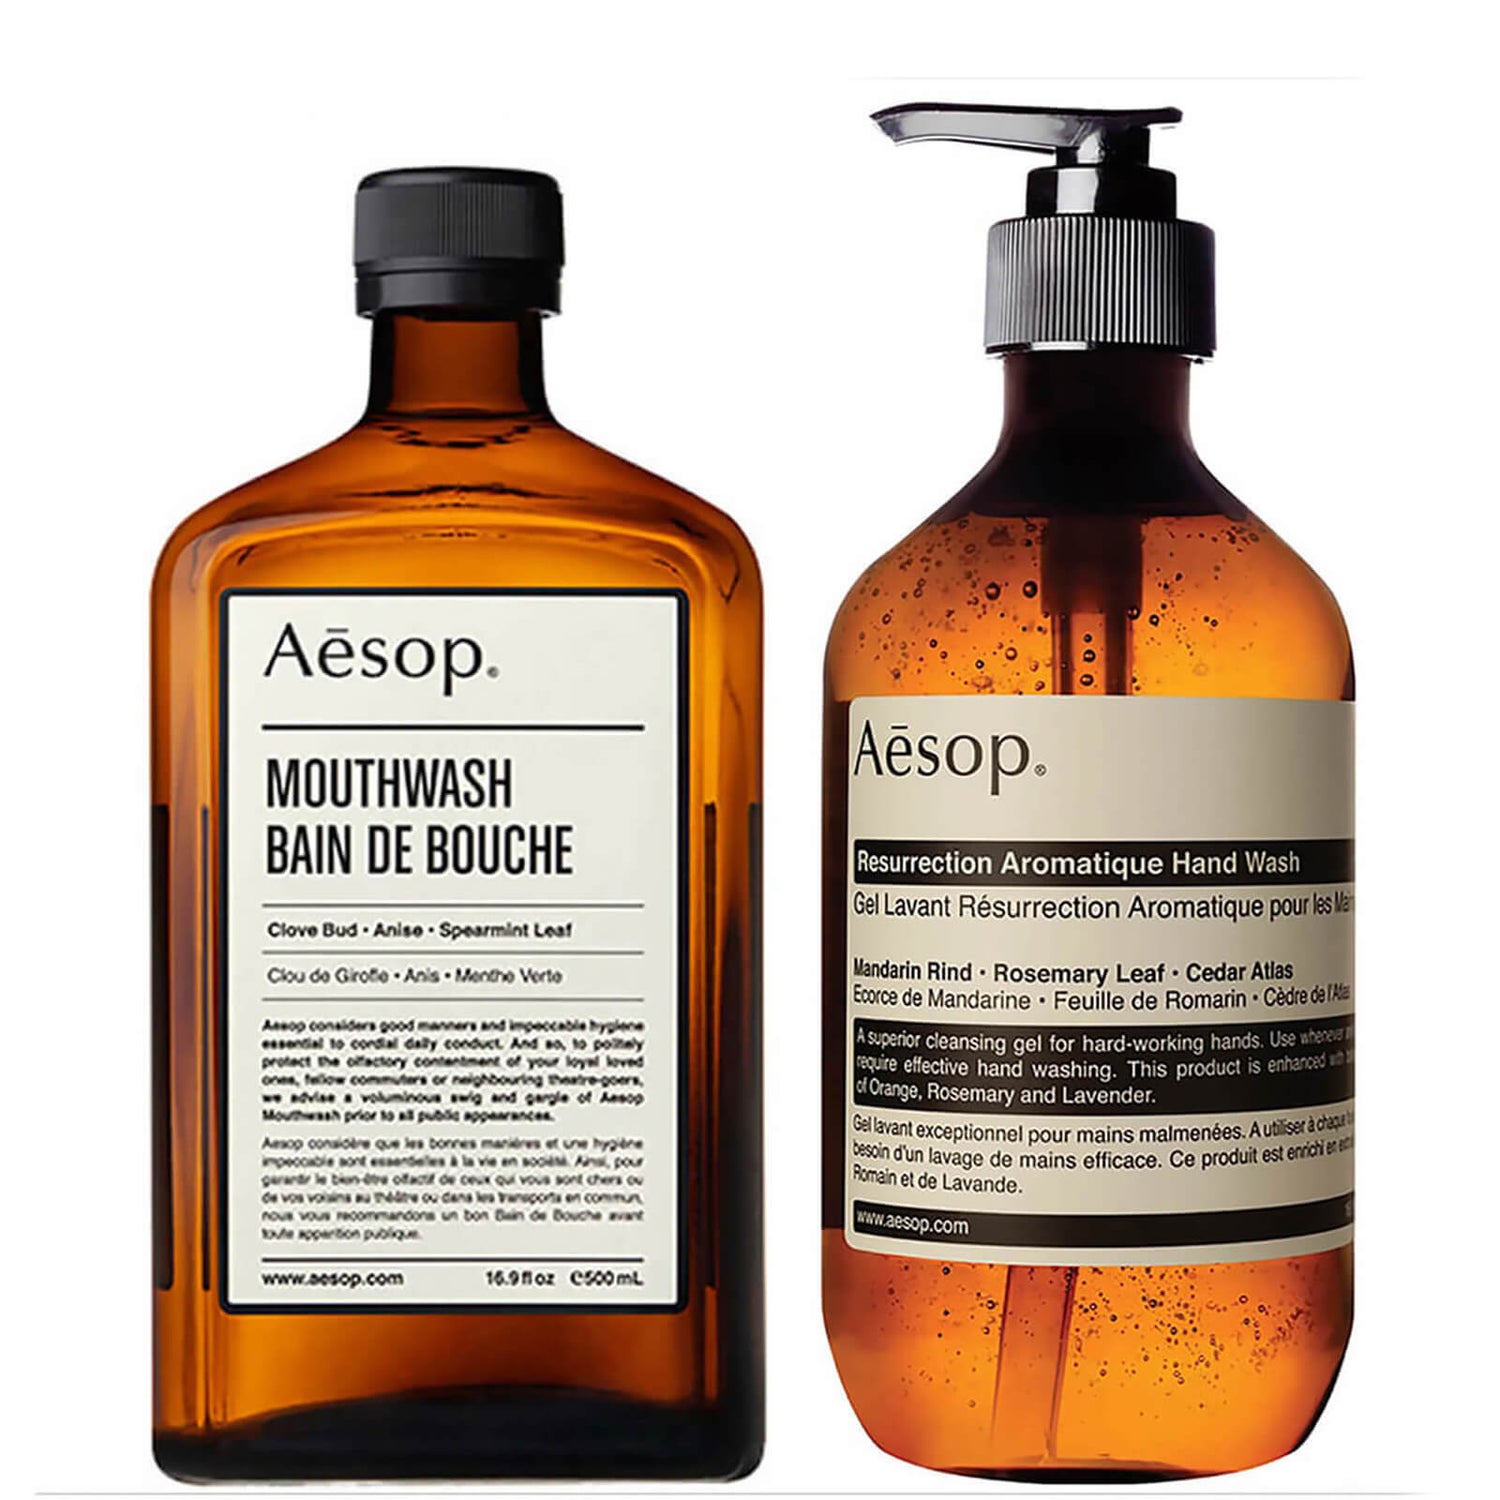 Aesop Hand Wash and Mouthwash Duo